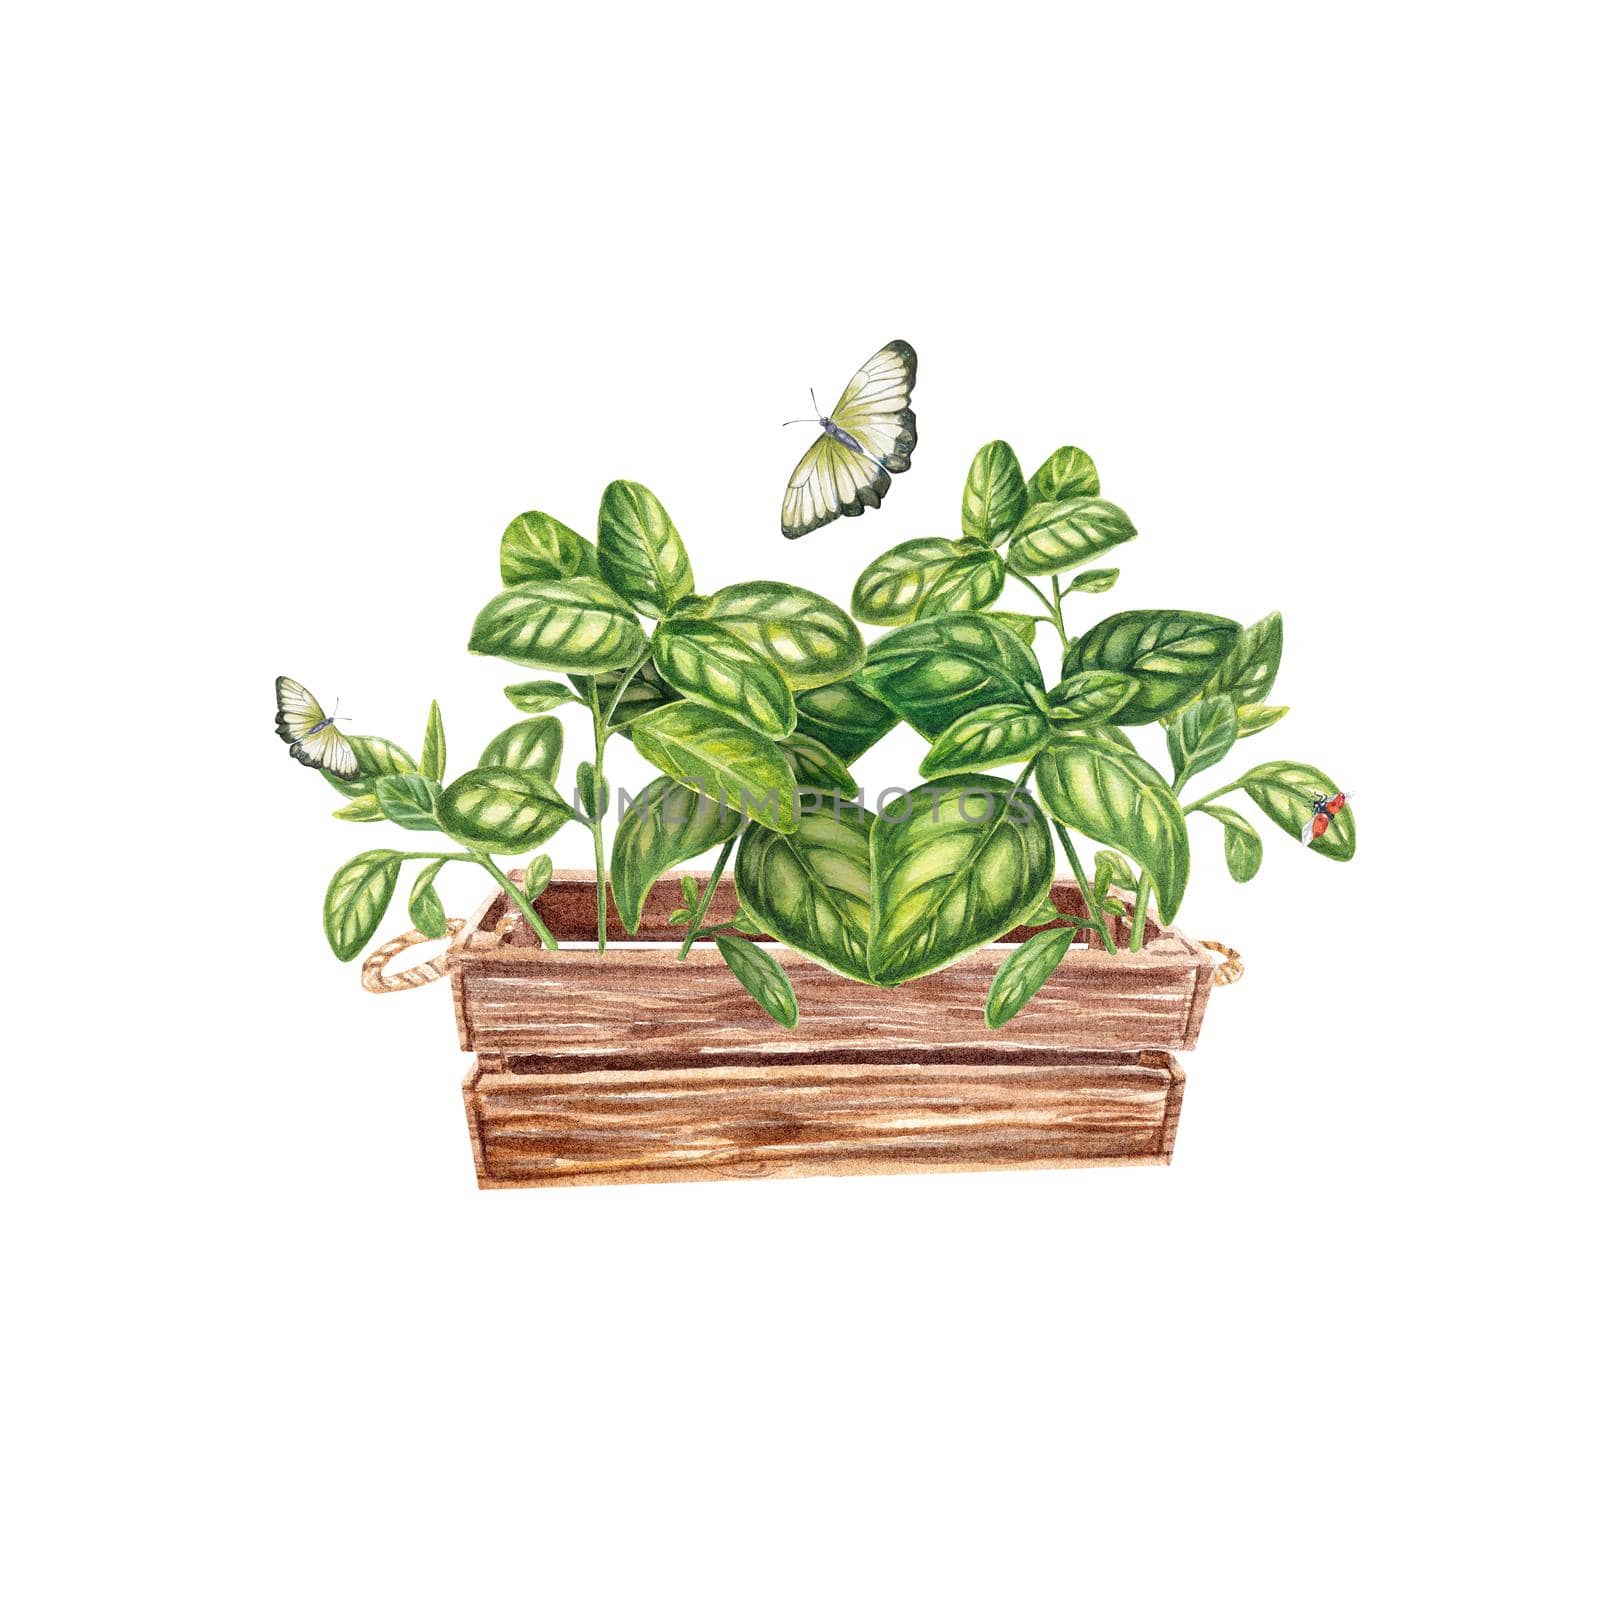 Basil in a wooden box in watercolor on a white background. Basil sprigs with butterflies. Provencal herbs, cooking, spices. The illustration is suitable for scrapbooking, stickers, design, postcards. by NastyaChe